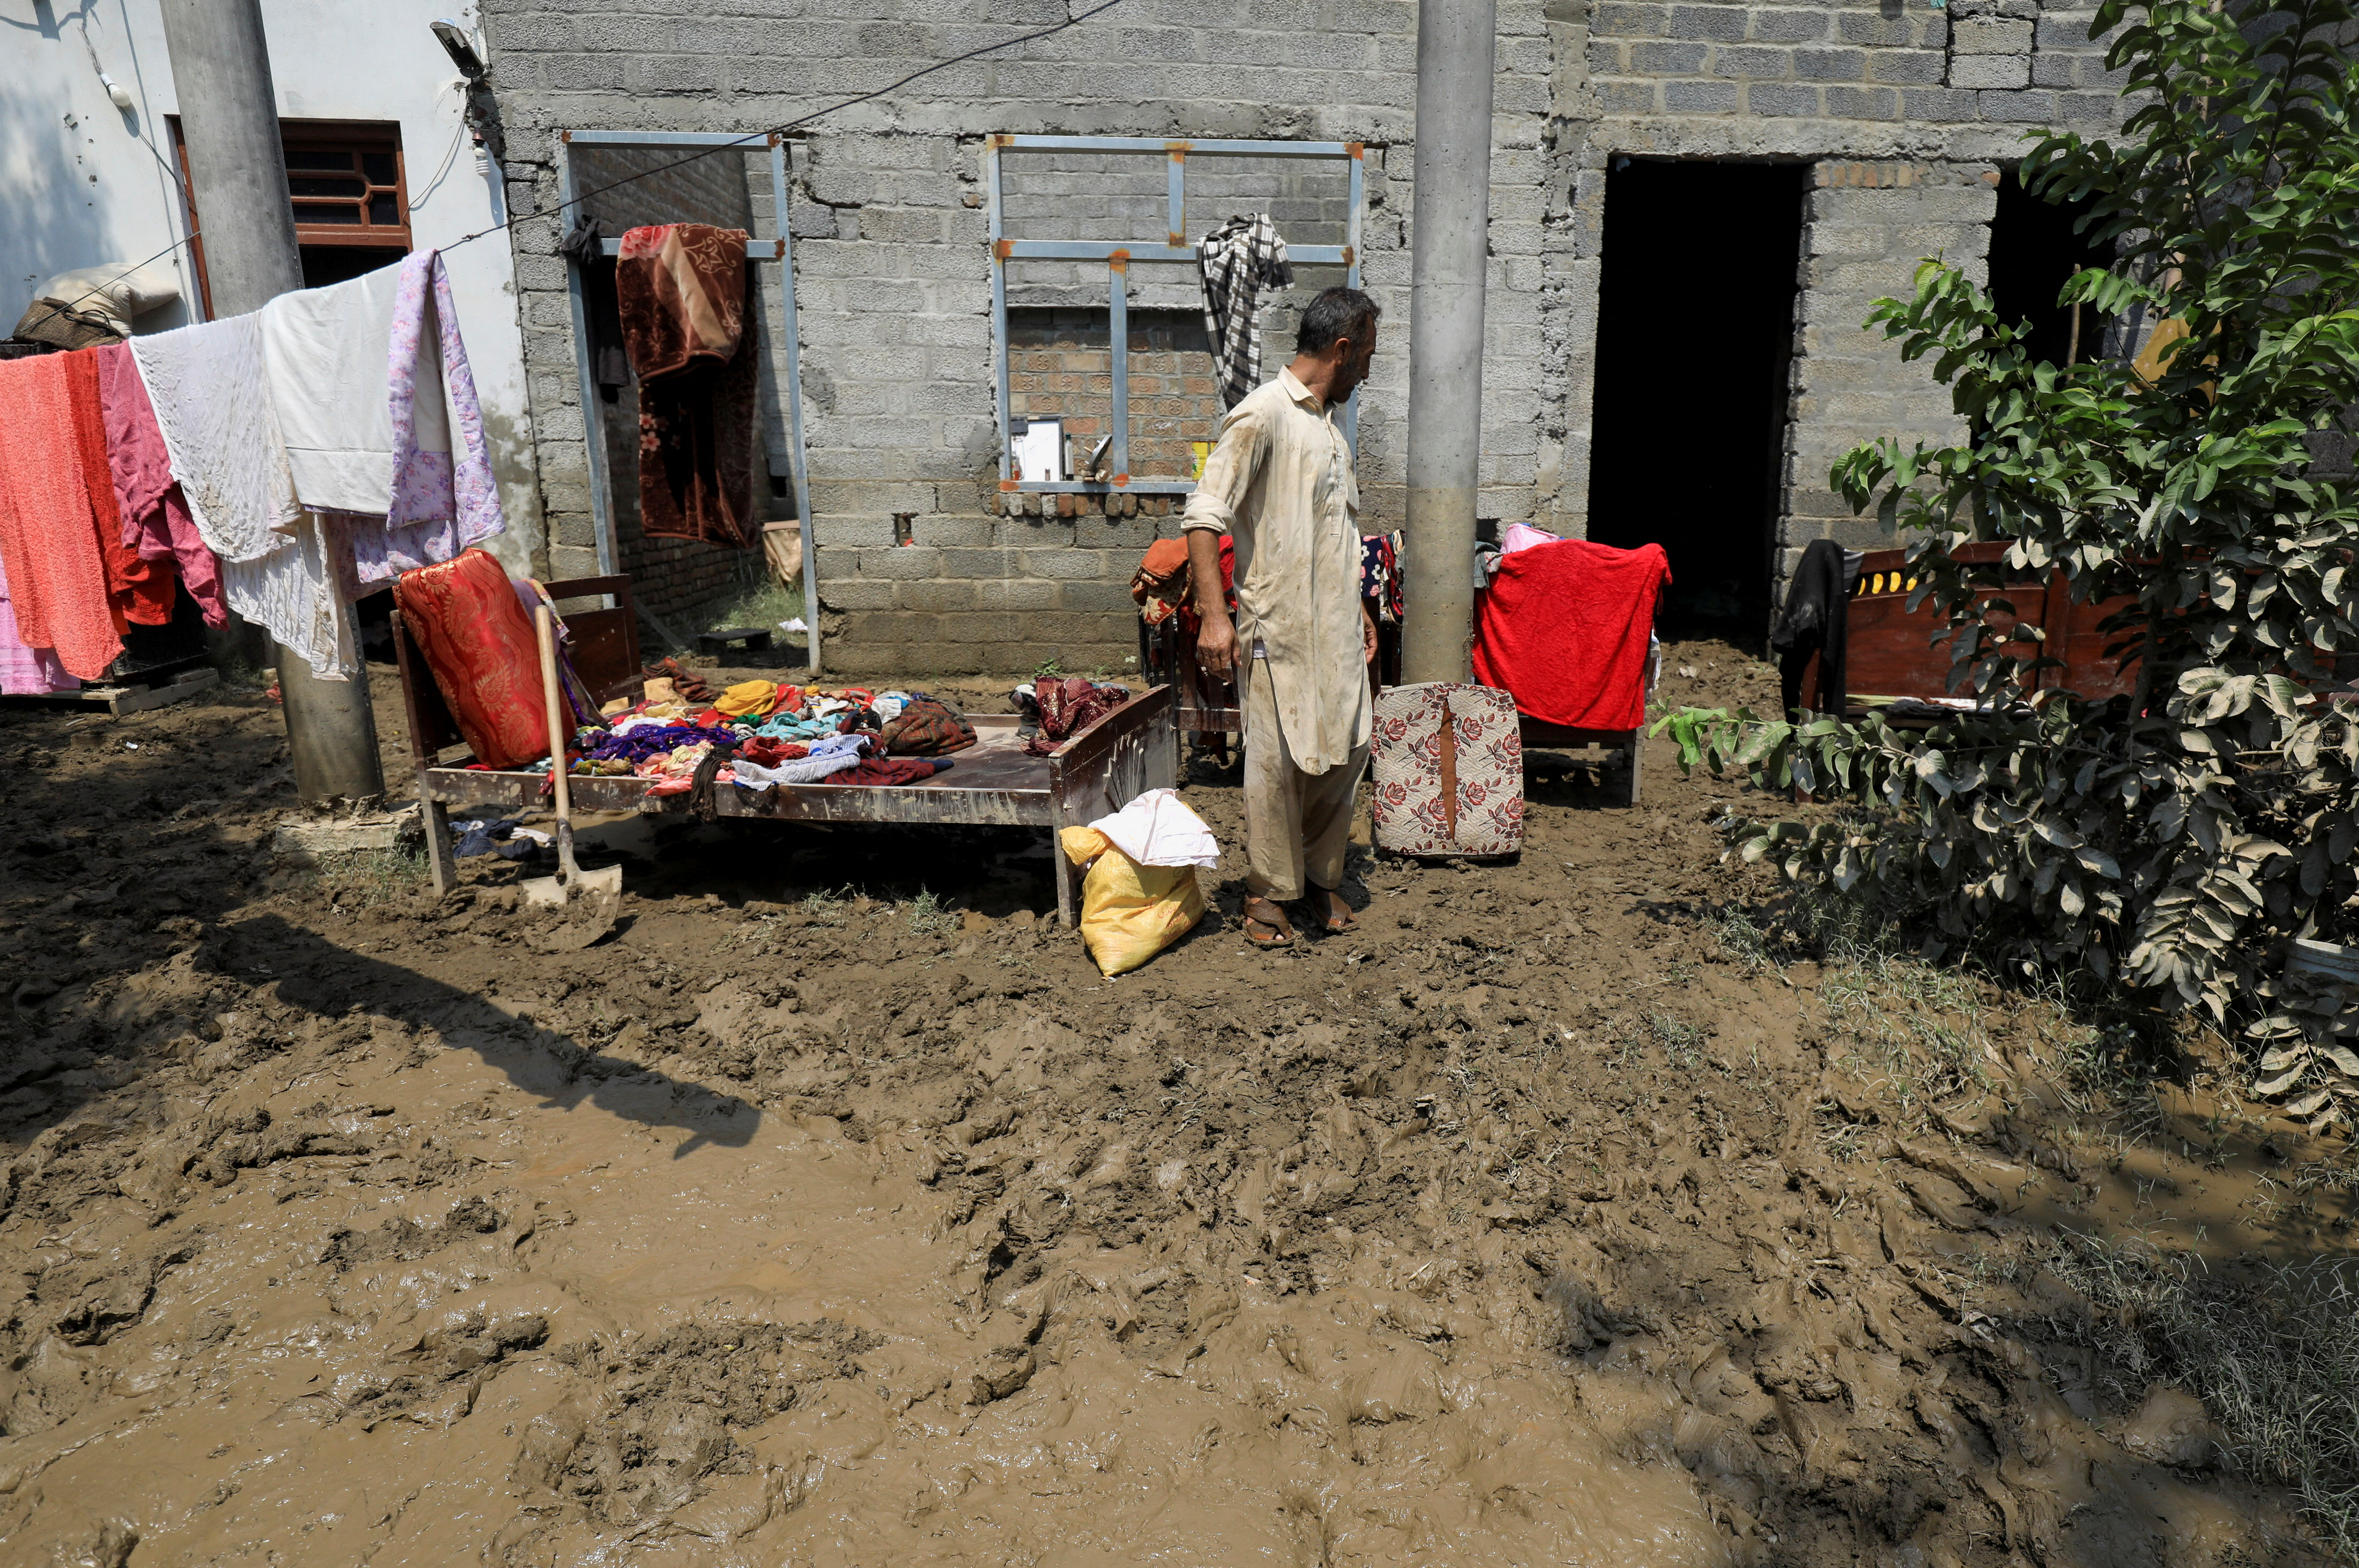 A man stands amid belongings as he clears his house, following rains and floods during the monsoon season in Charsadda,